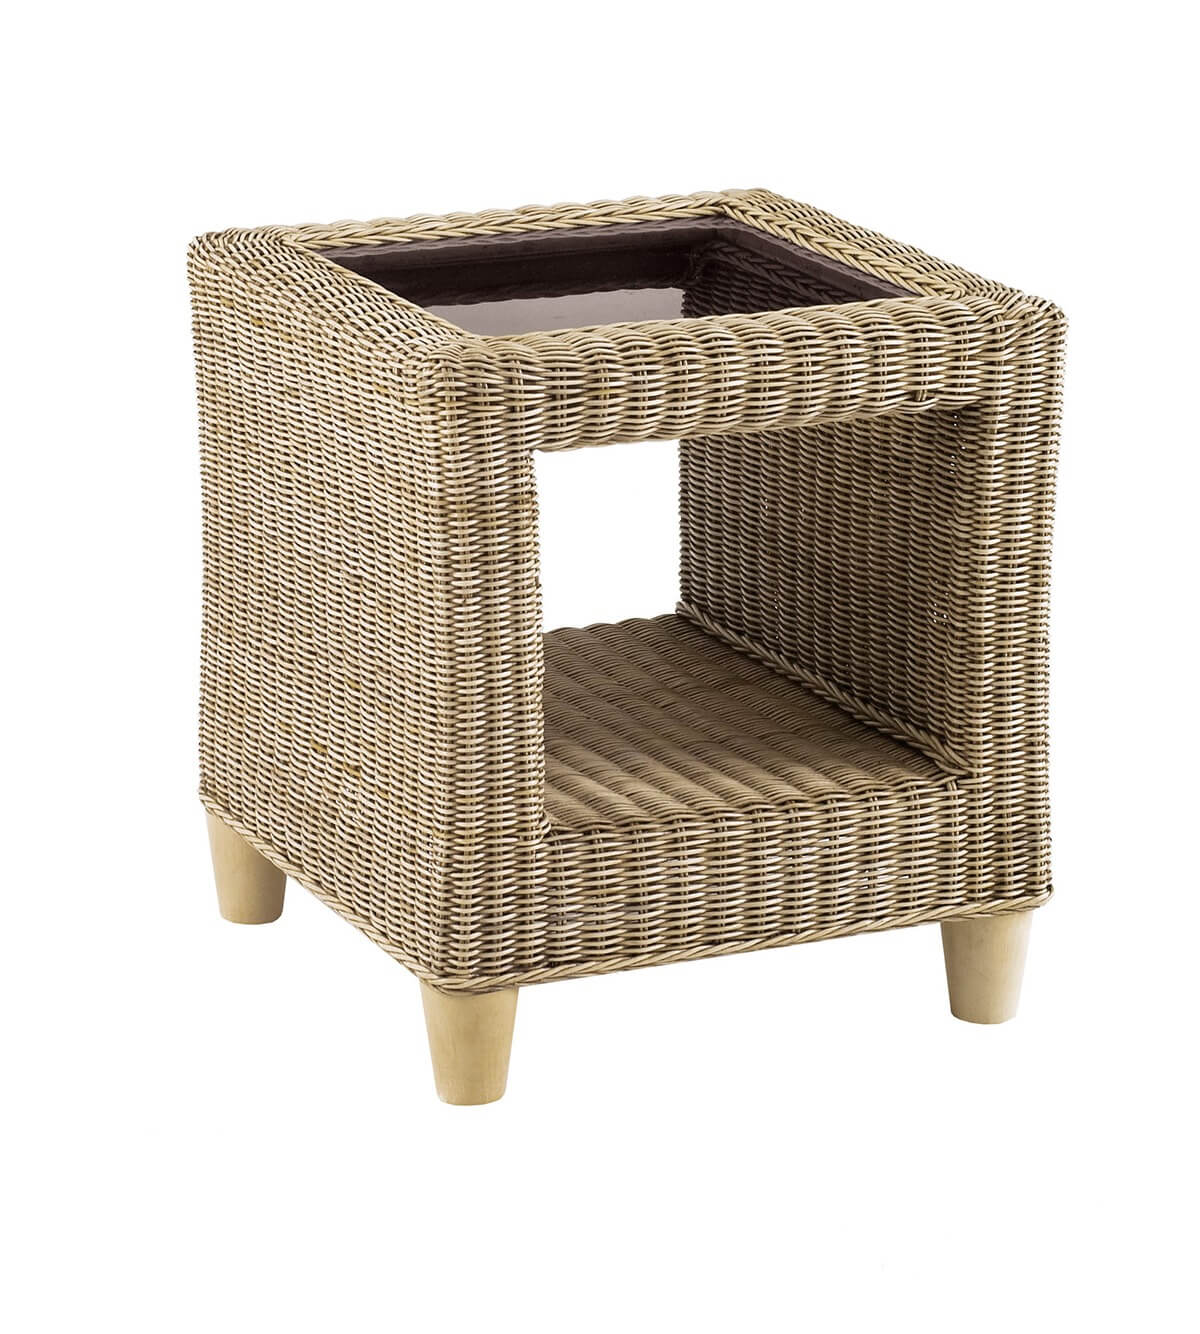 Showing image for Sarno side table